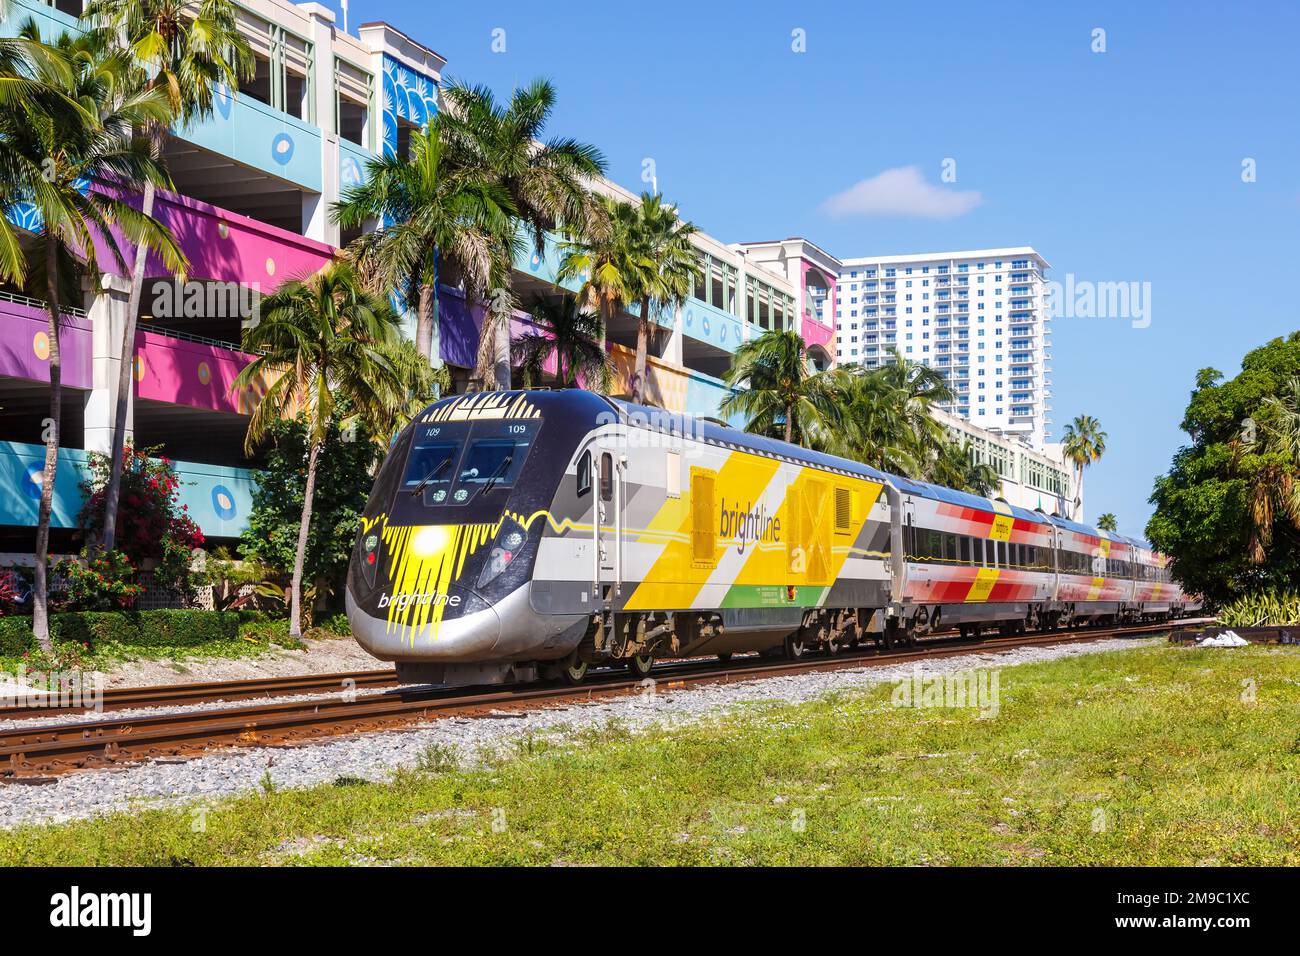 West Palm Beach, United States - November 14, 2022: Brightline private inter-city rail train in West Palm Beach in Florida, United States. Stock Photo